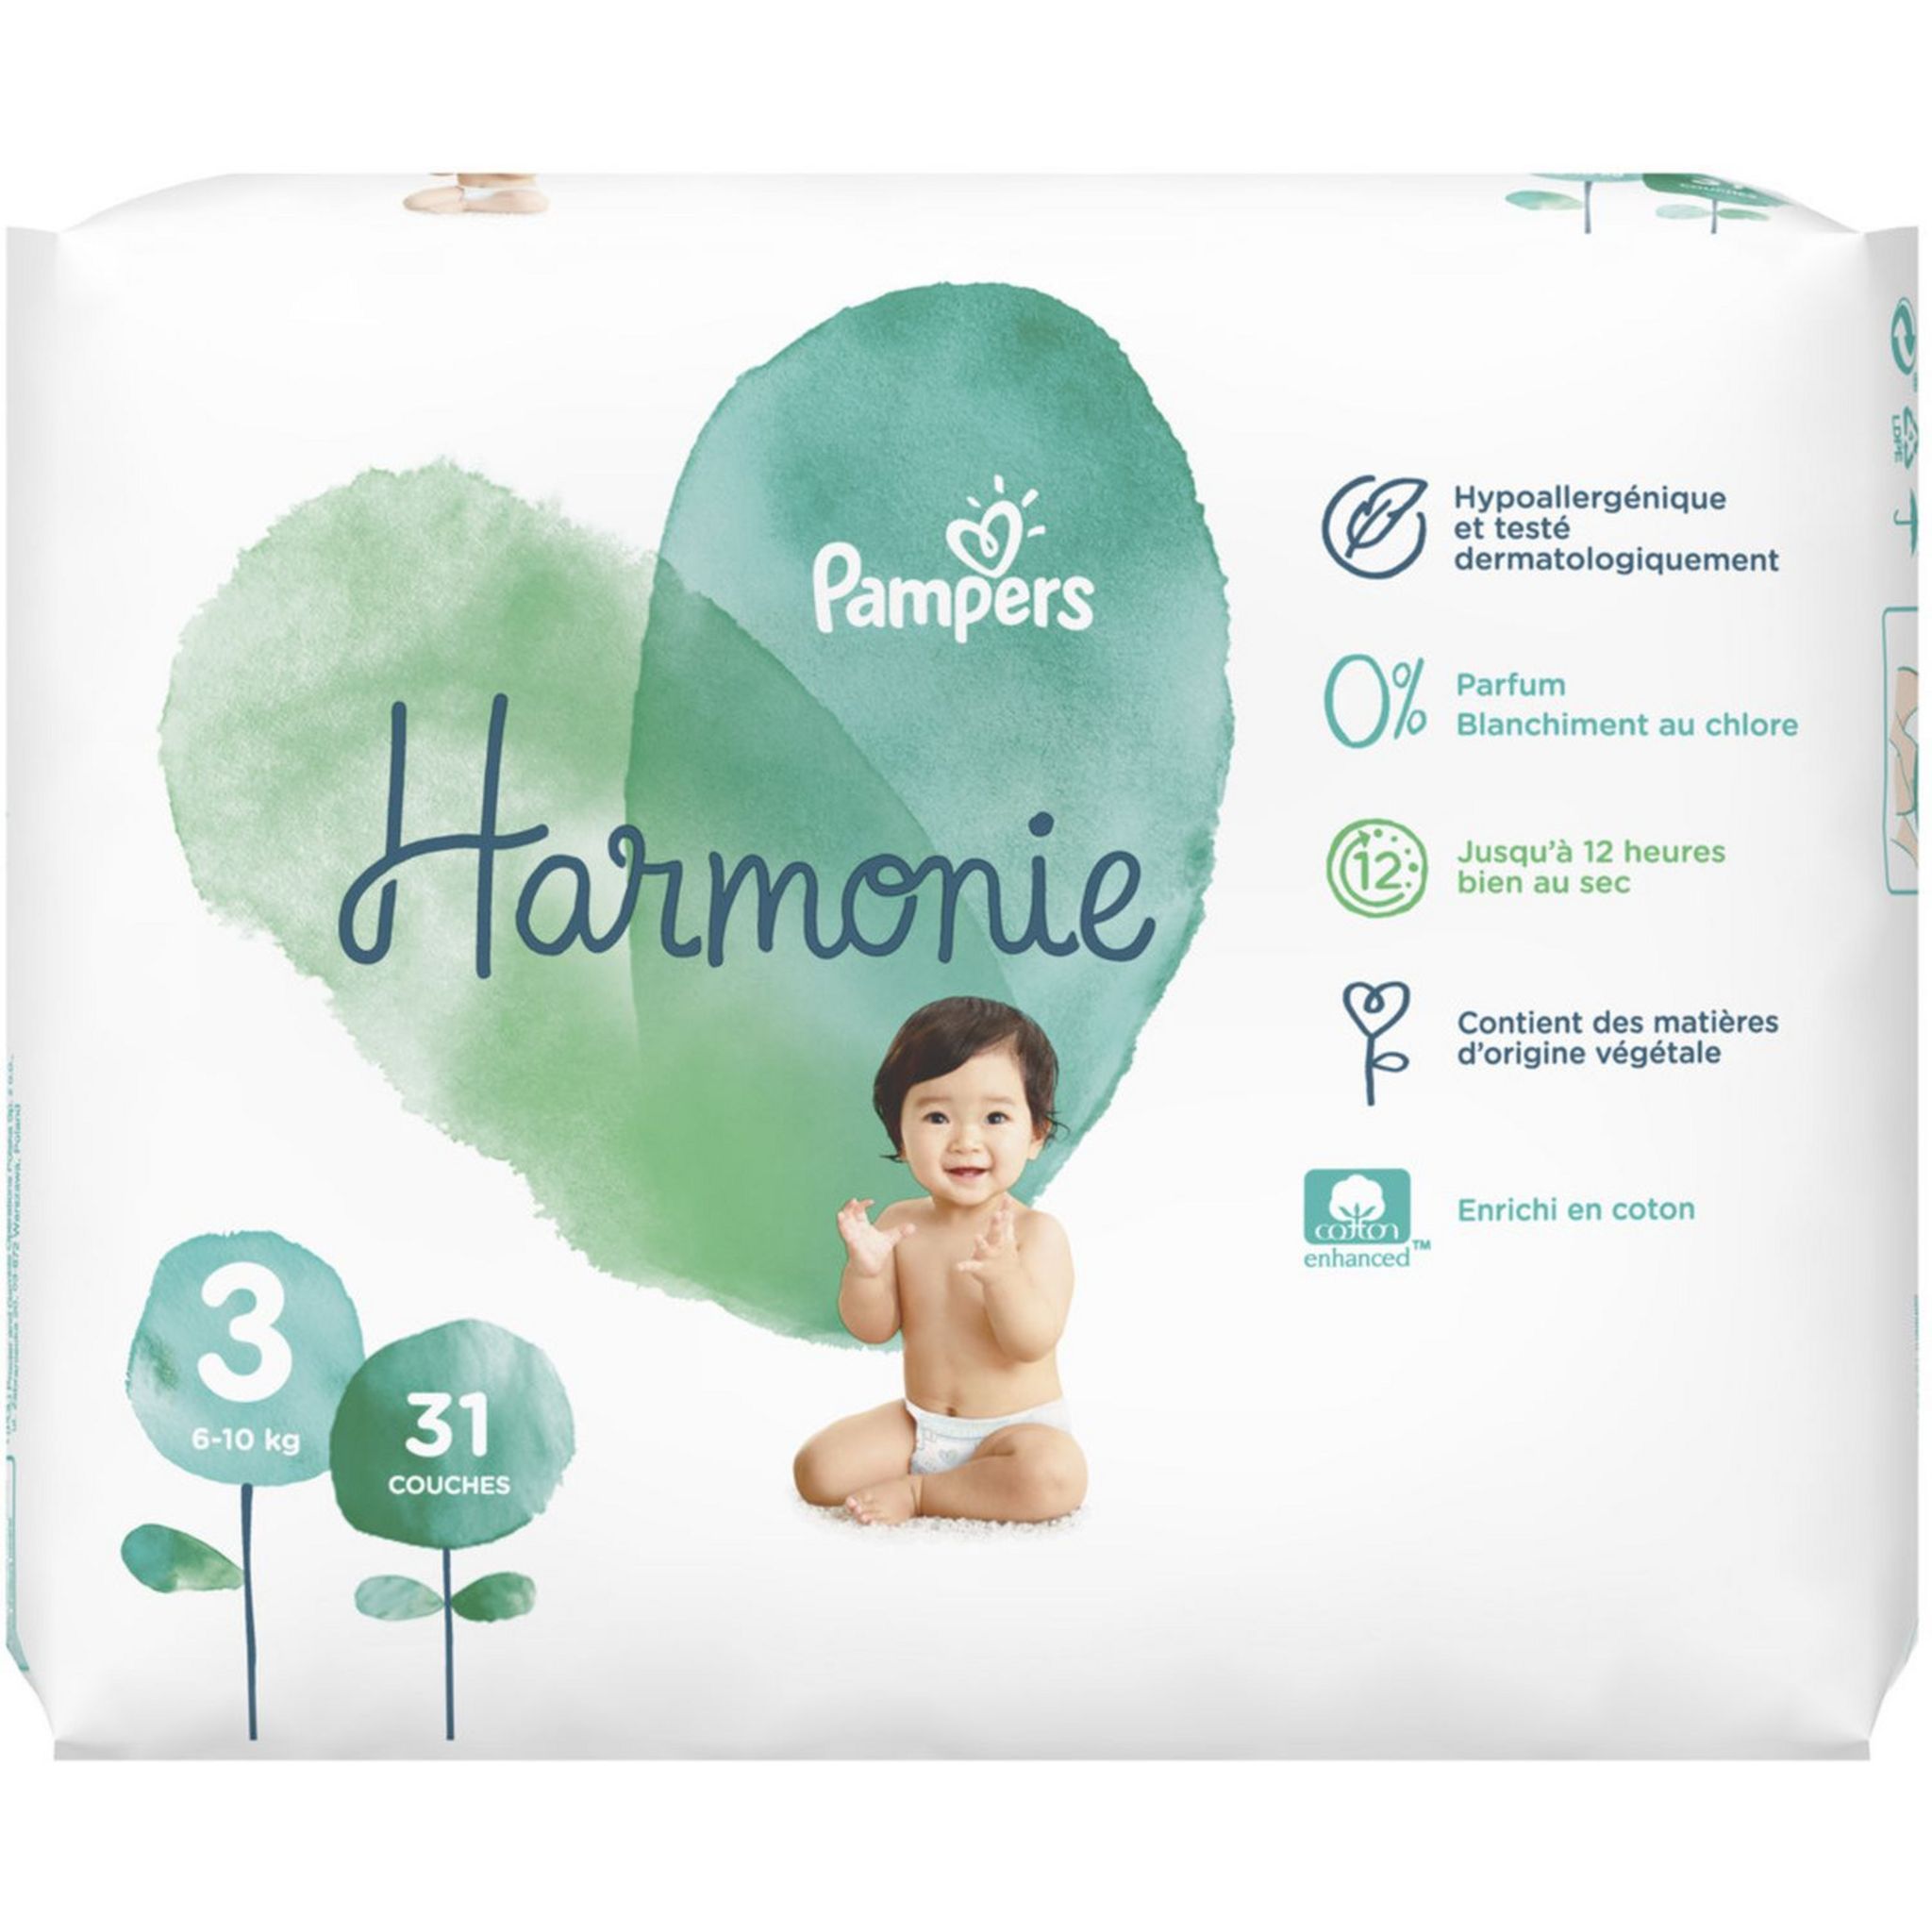 PAMPERS Harmonie couches taille 3 (6-10kg) 31 couches pas cher 